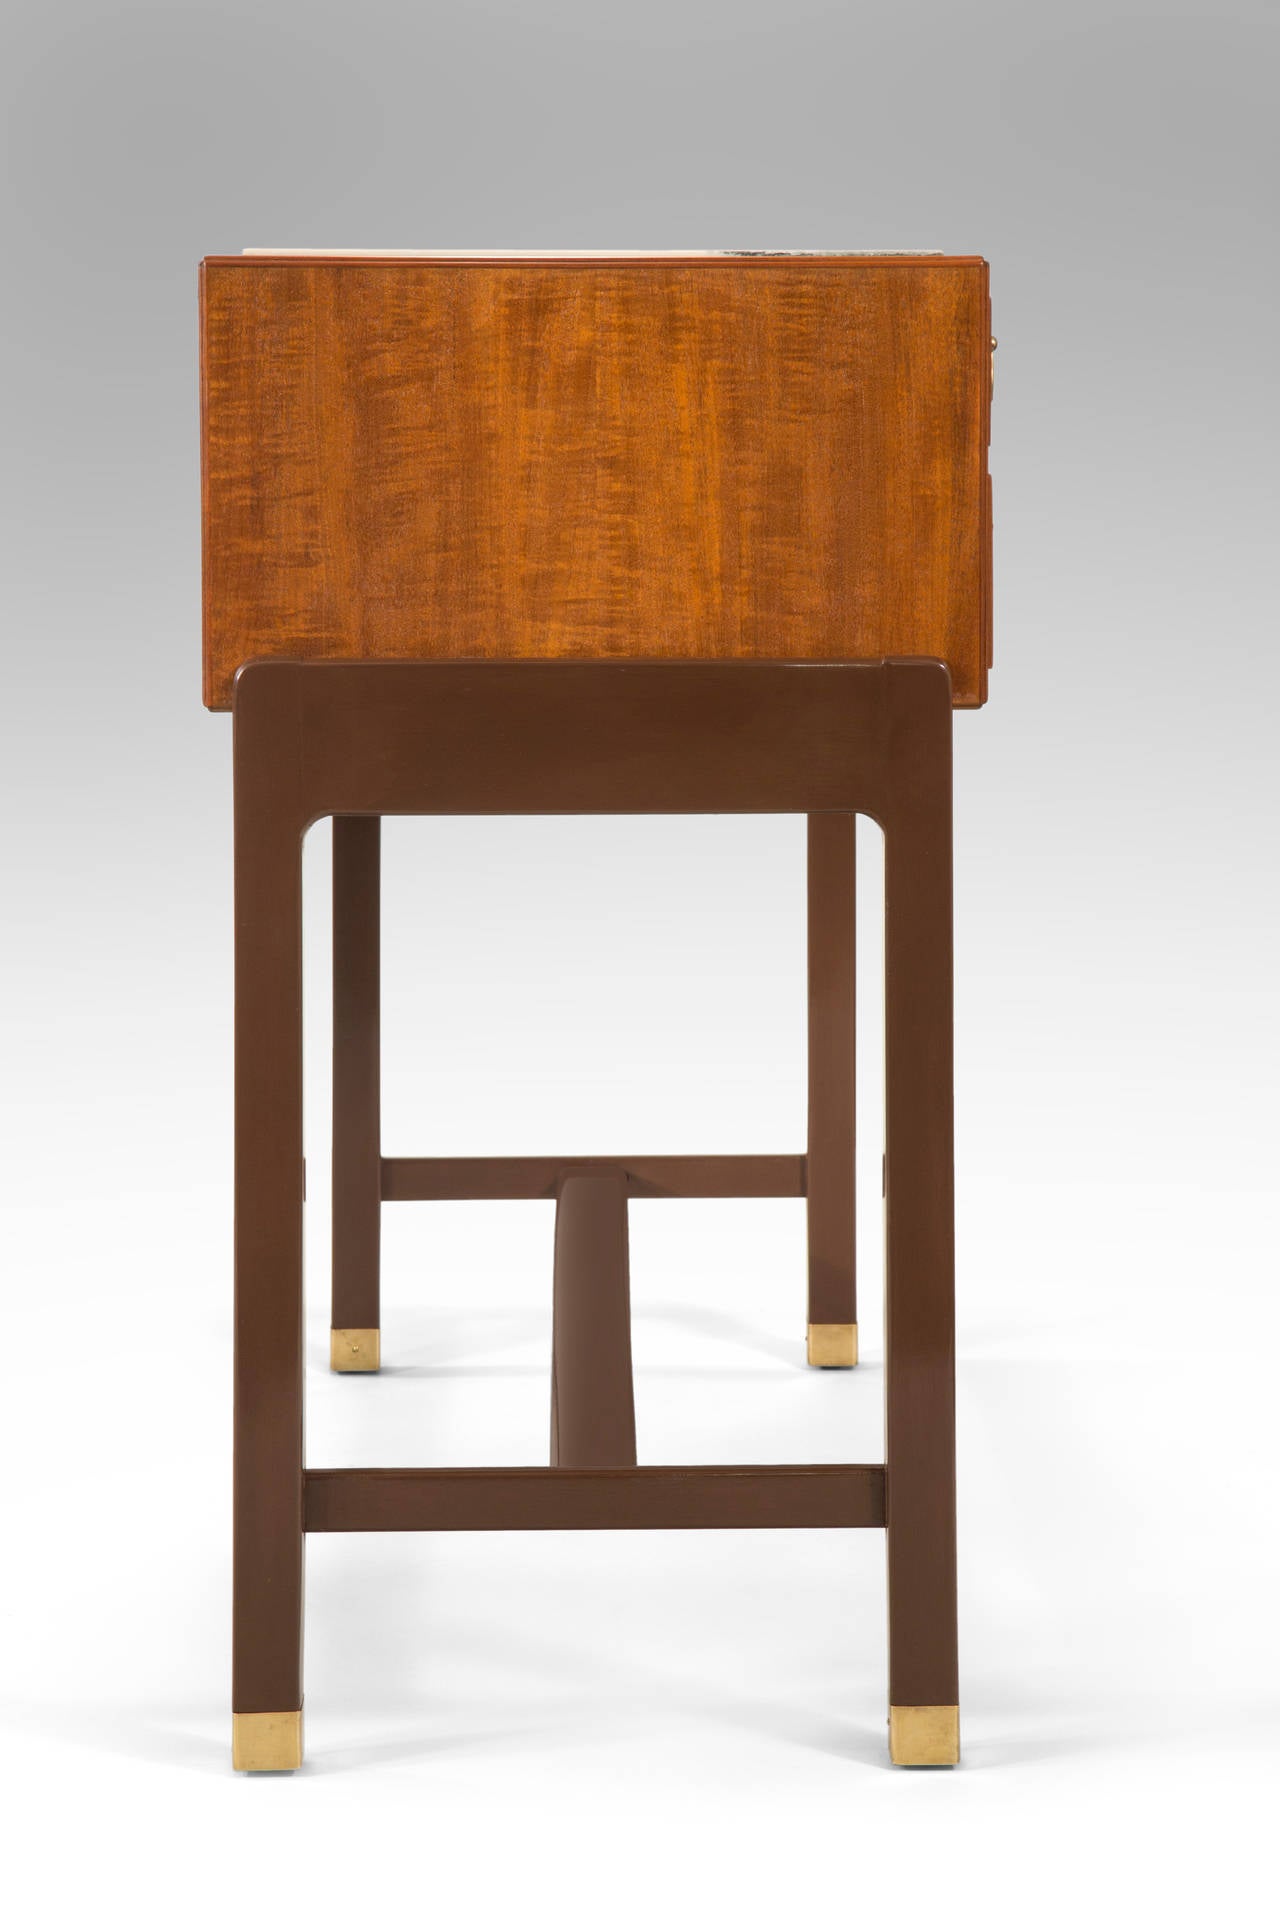 Modern Ernst Kuhn for Normina: An Exceptional Marble, Lacquer and Mahogany Cabinet